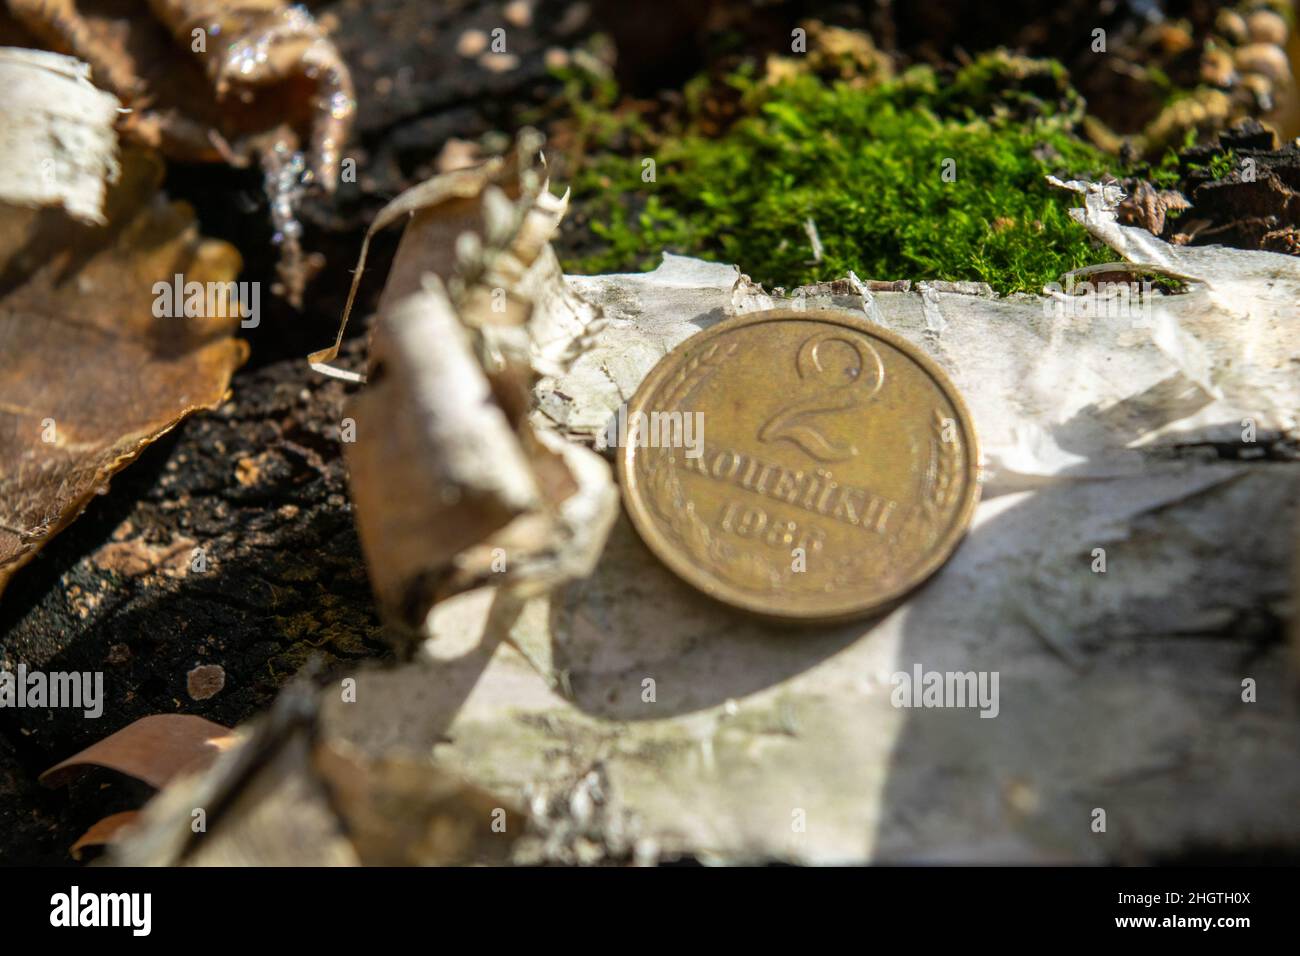 Old coins in the forest on a piece of birch bark lying on green moss Stock Photo